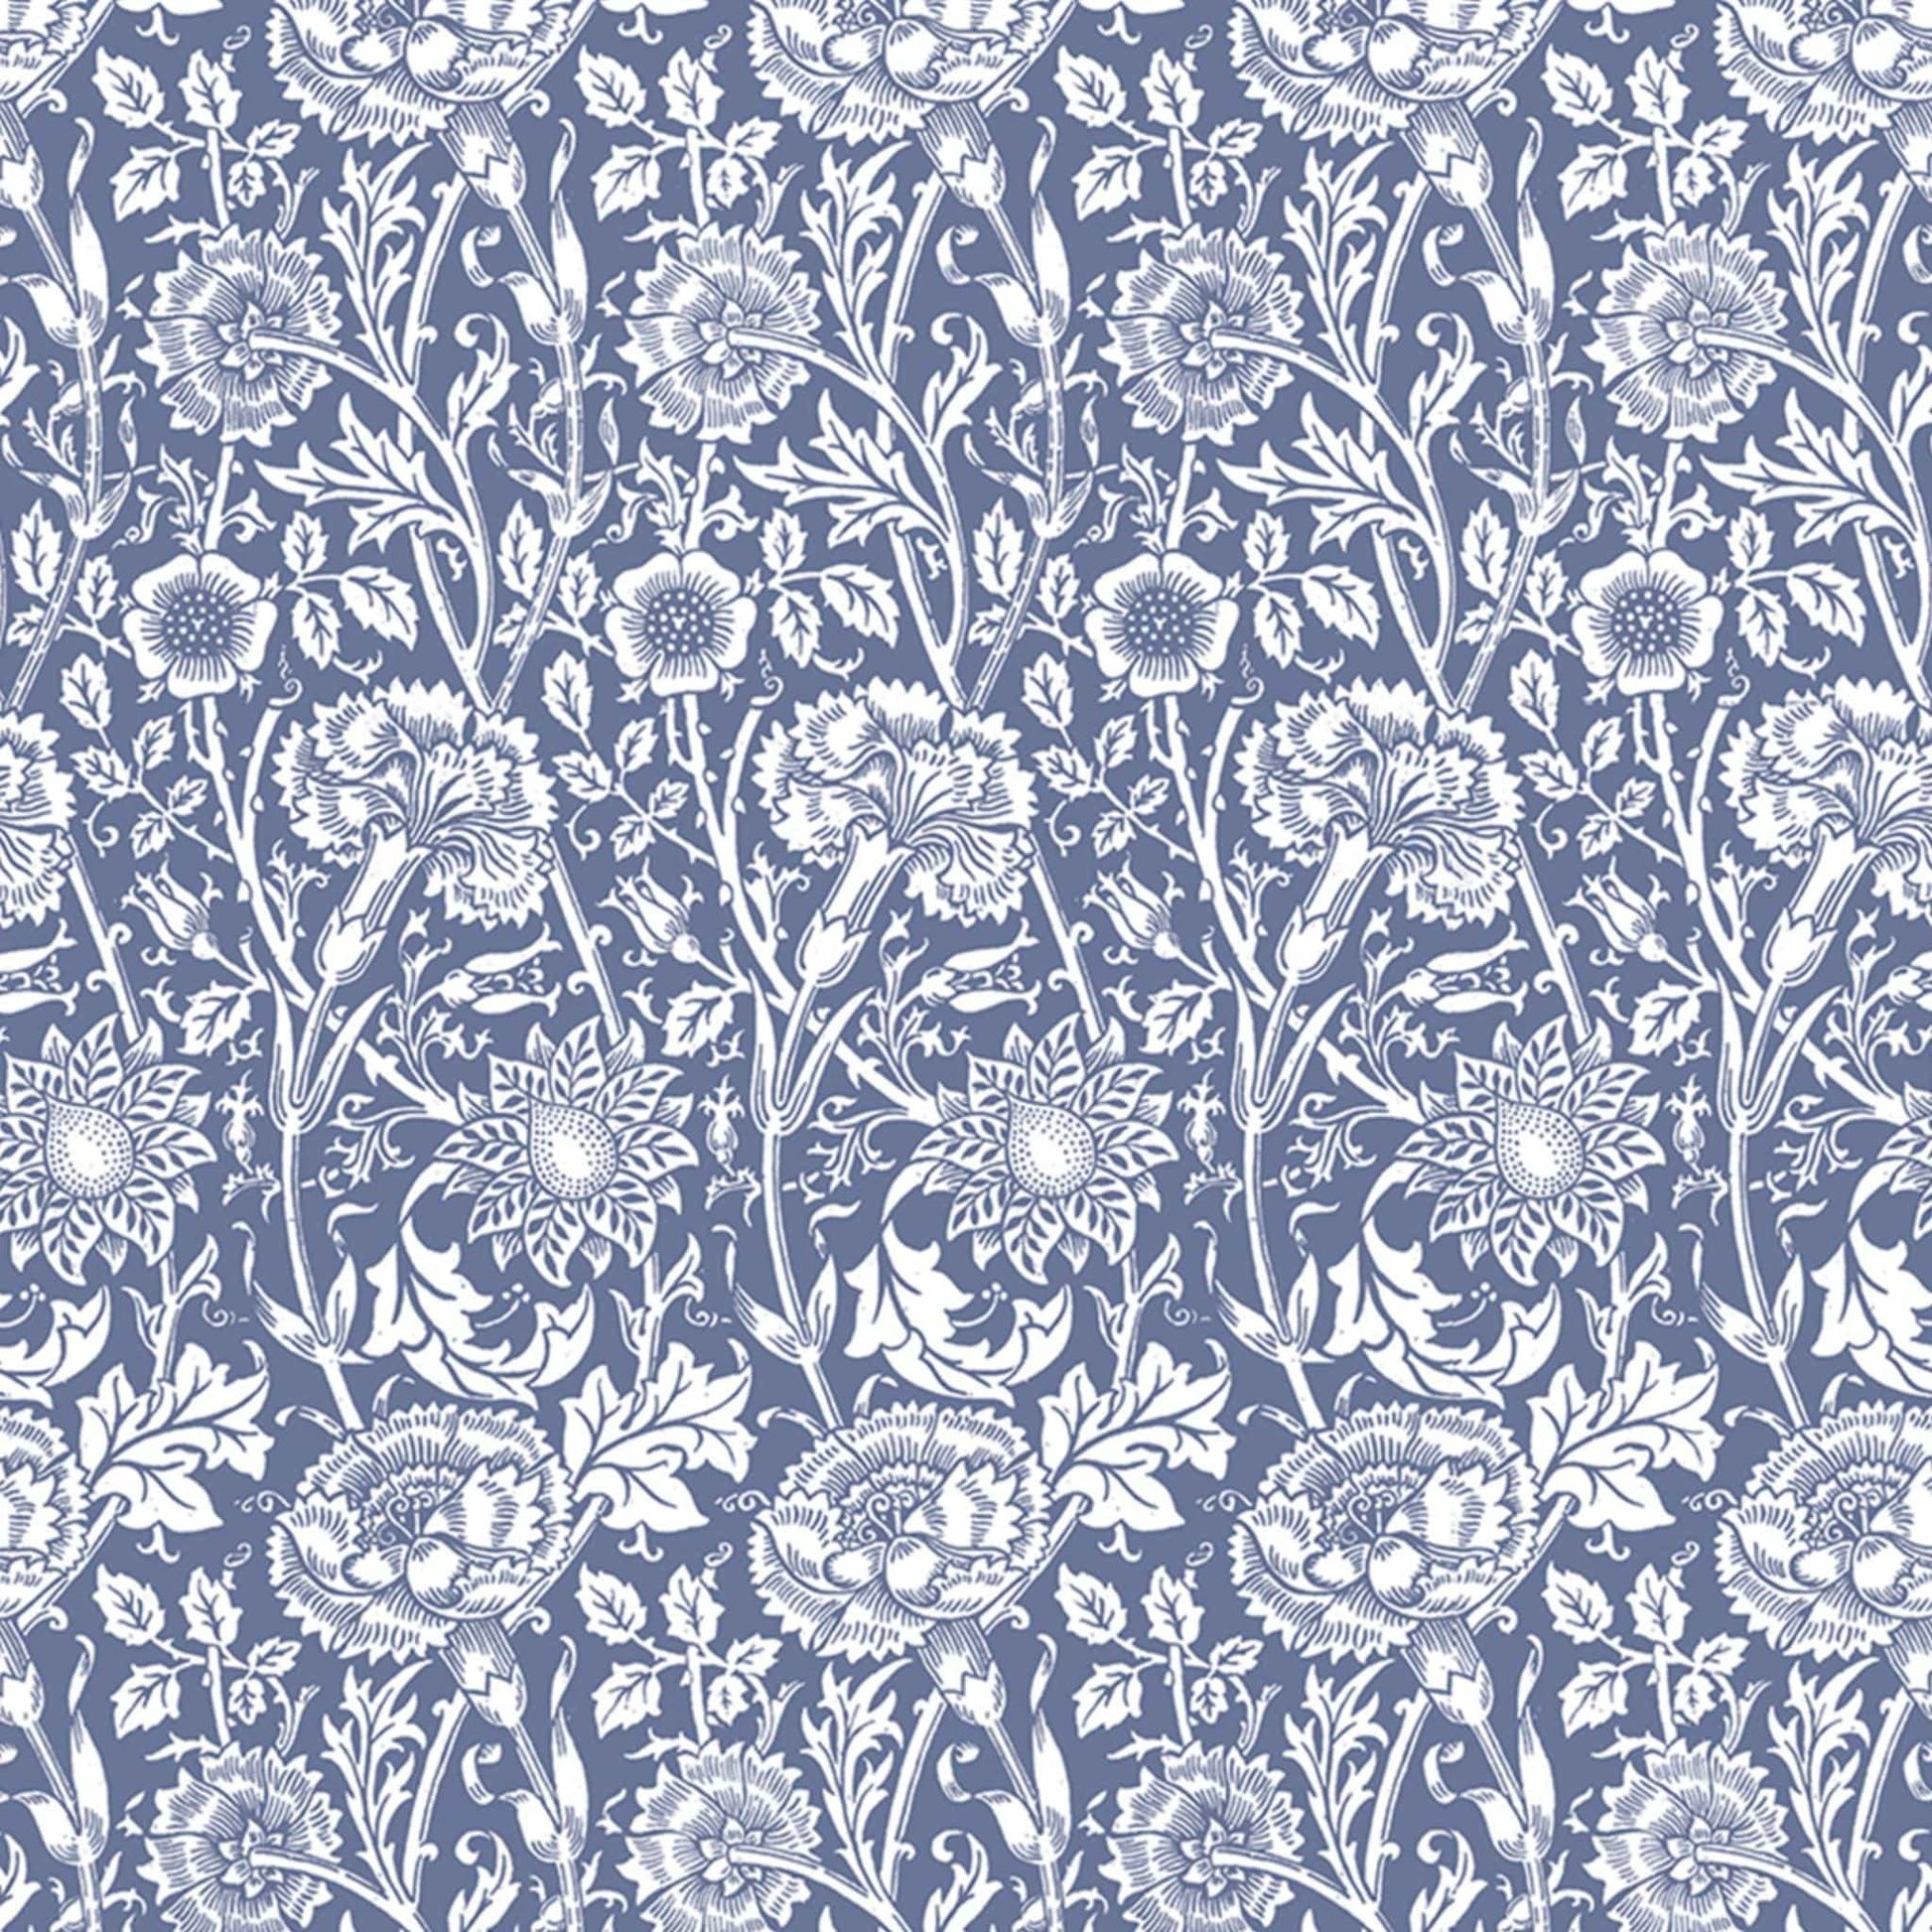 THE MASTER HERBALIST LAVENDER fragrance SCENTED Drawer Liners in BLUE William Morris Design. Made in Britain.